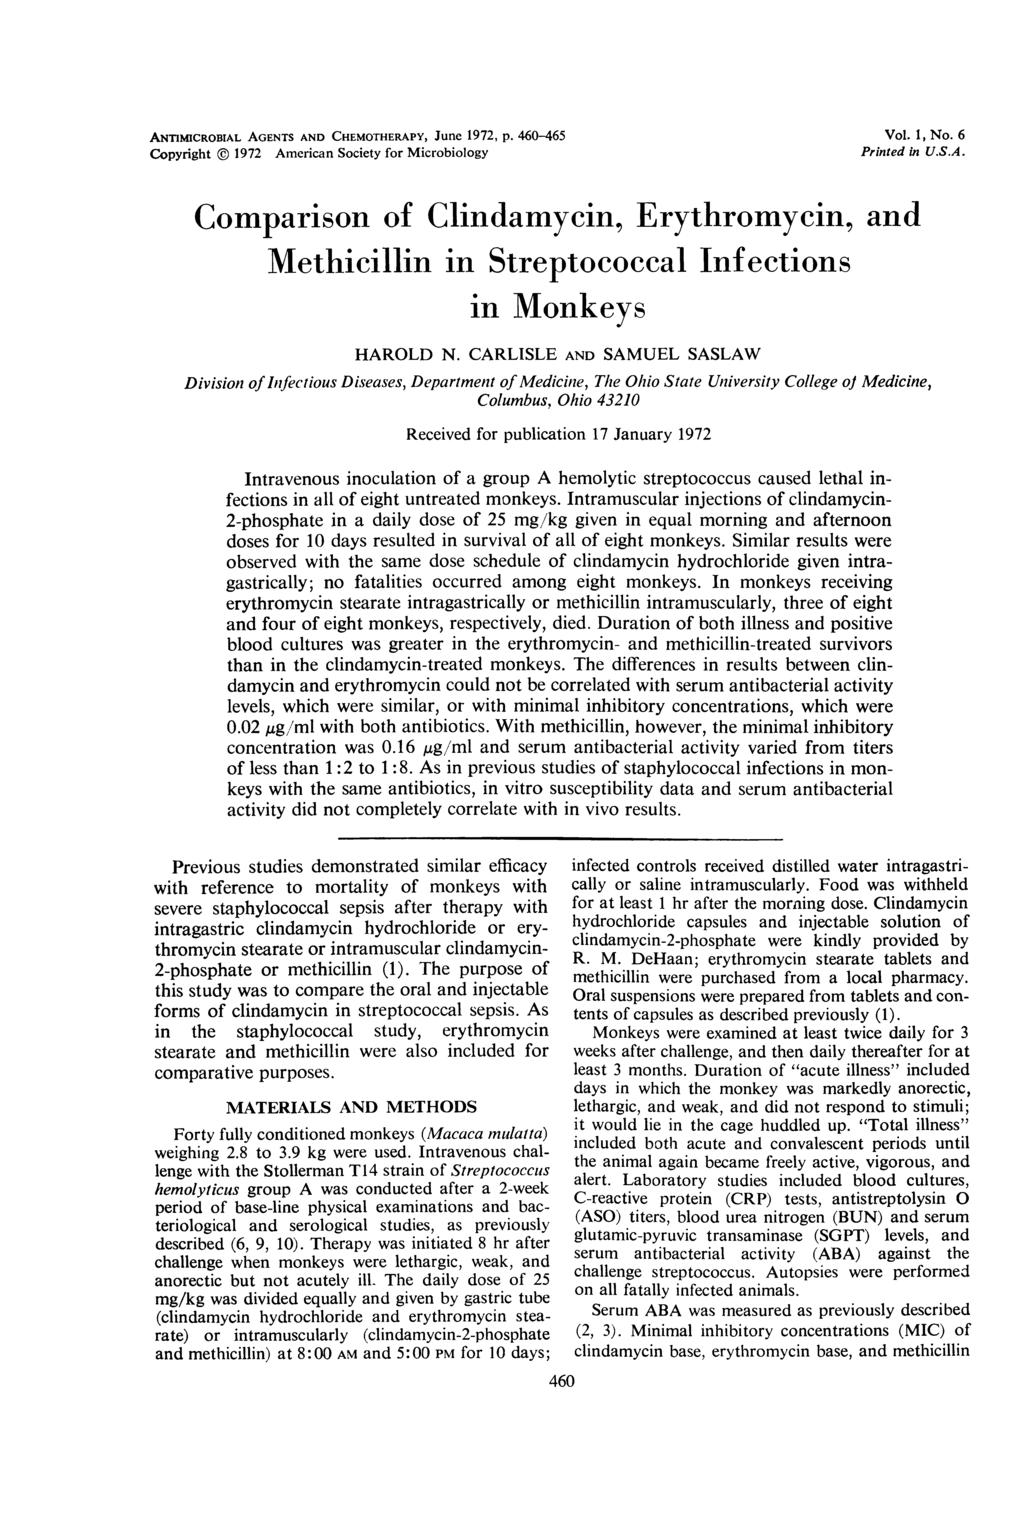 ANTIbMCROBIAL AGENTS AND CHEMOTHERAPY, June 197, p. 460-465 Copyright 197 American Society for Microbiology Vol. 1, No. 6 Printed in U.S.A. Comparison of Clindamycin, Erythromycin, and Methicillin in Streptococcal Infections in Monkeys HAROLD N.